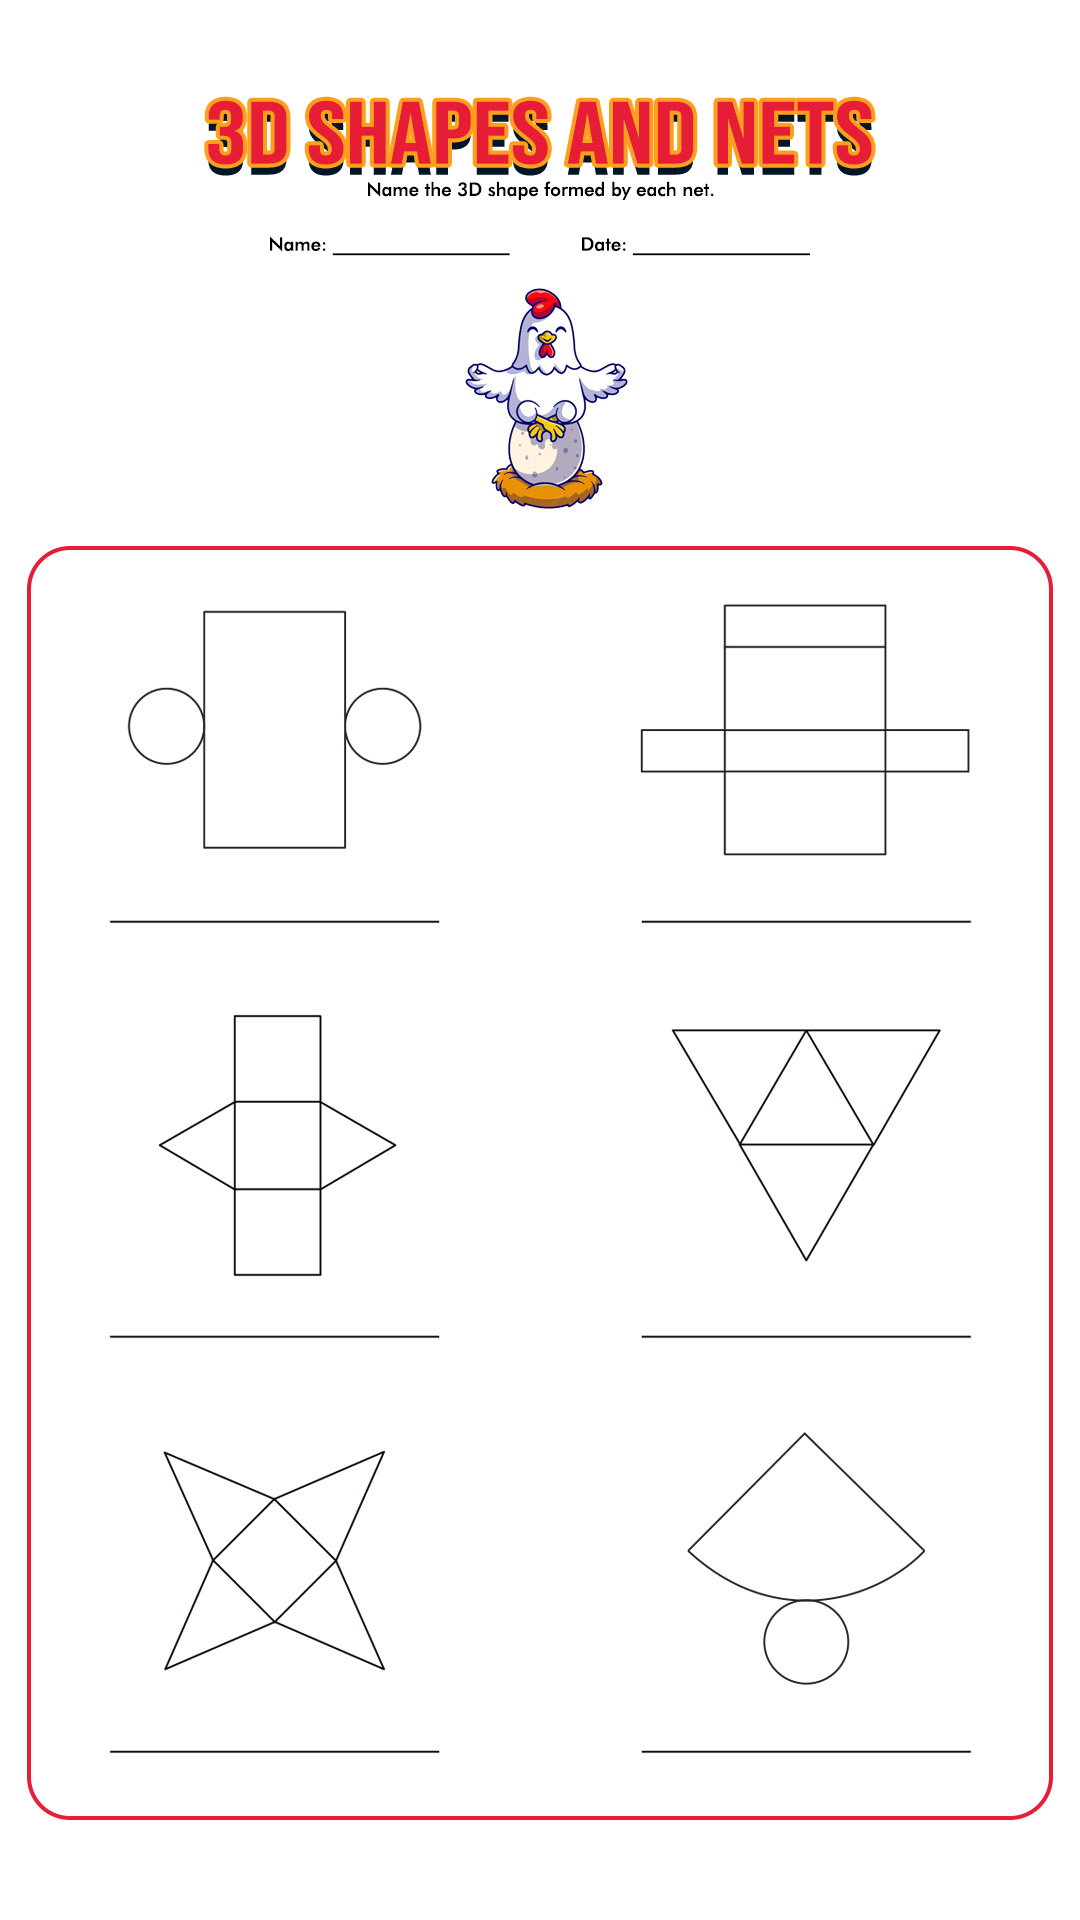 Nets of 3D Shapes Printables Image